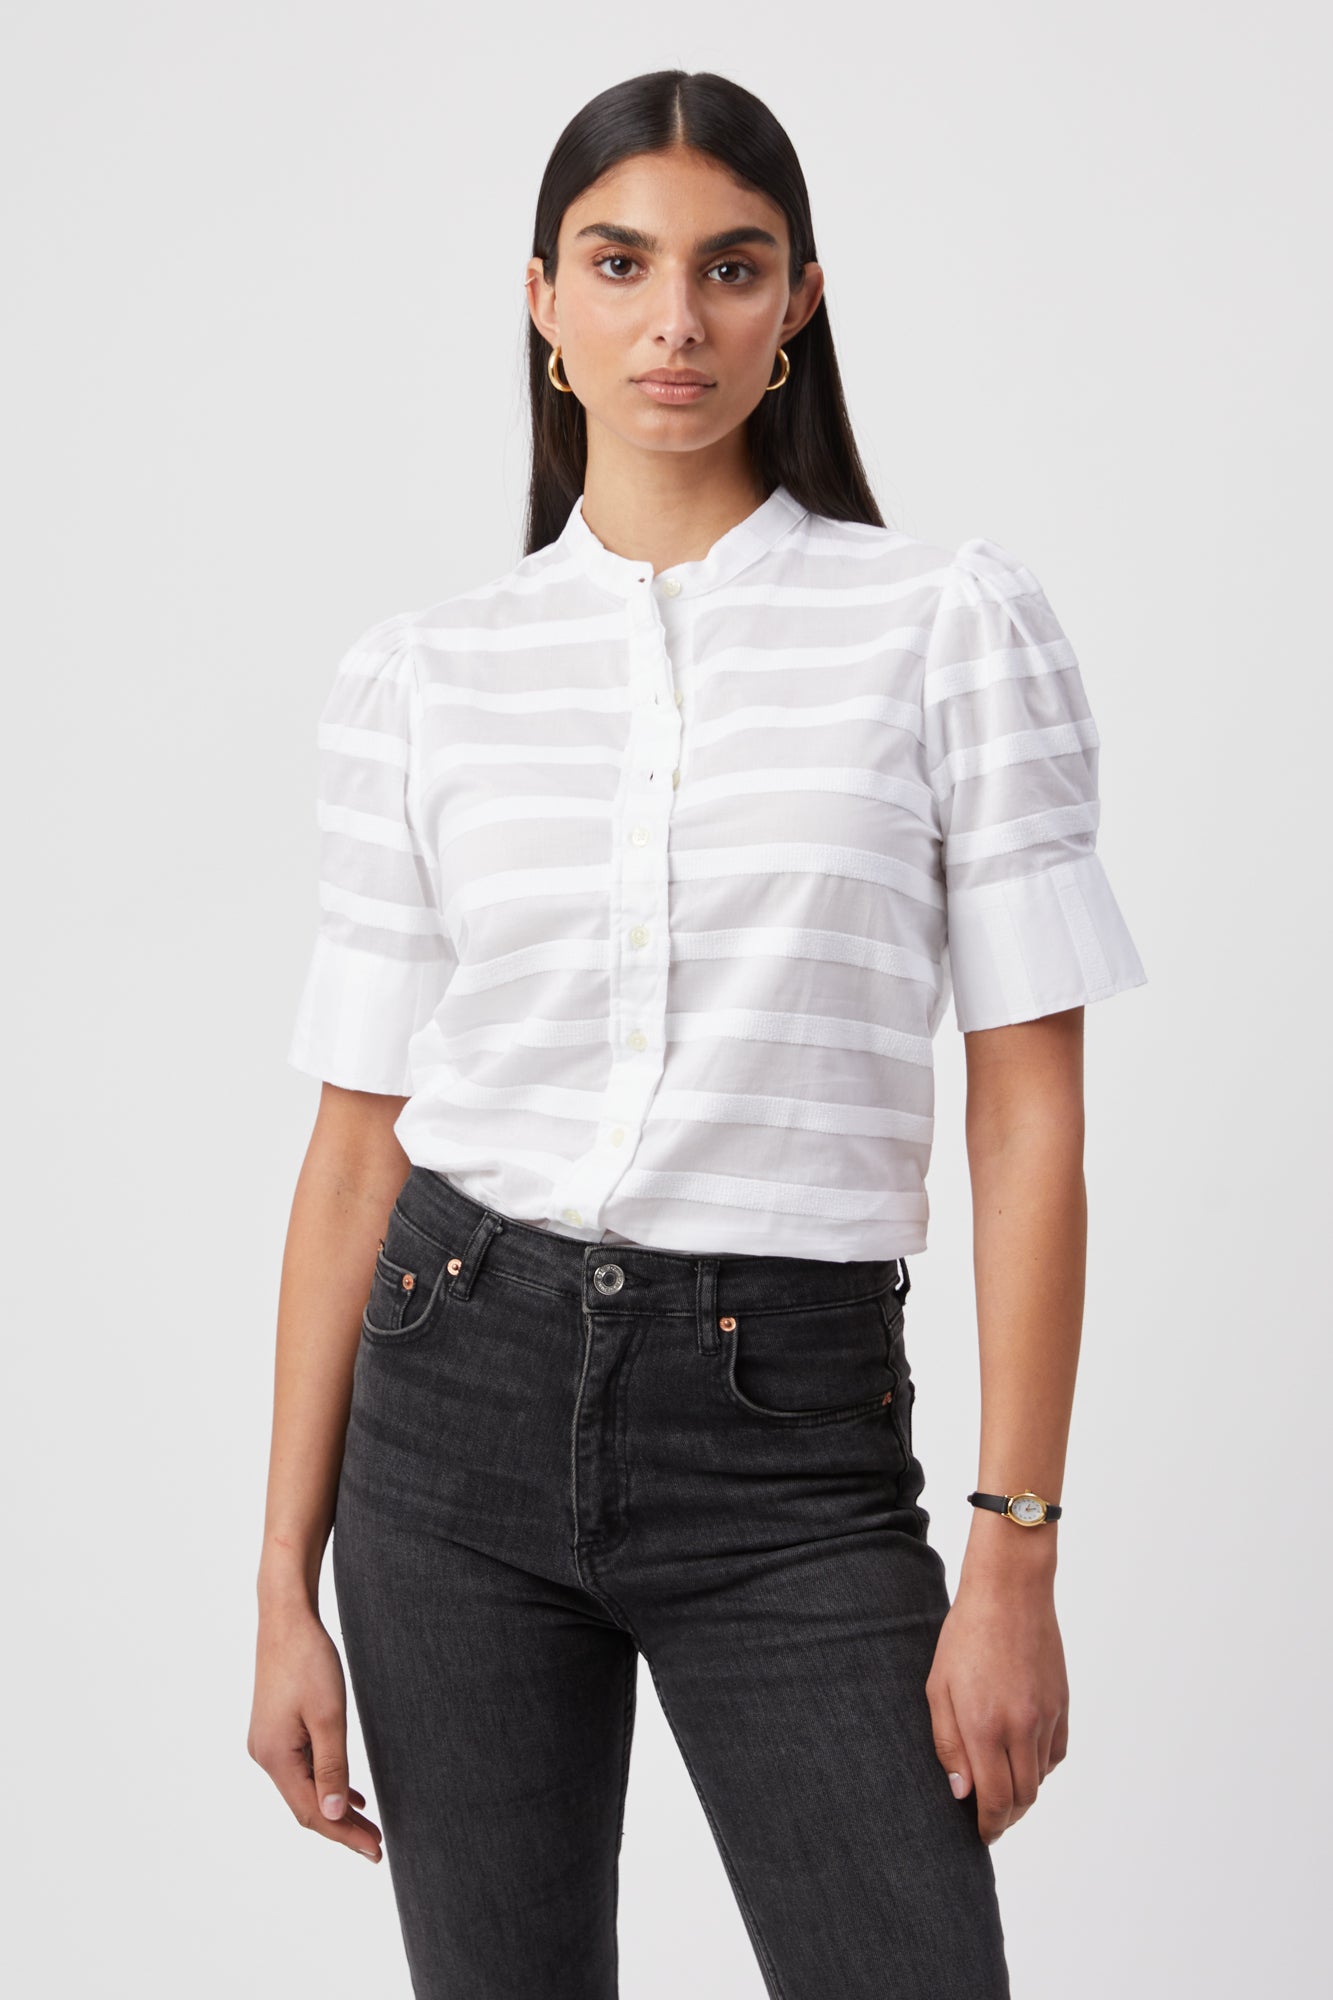 The Shirt by Rochelle Behrens - The Short Sleeve Puffed Shoulder